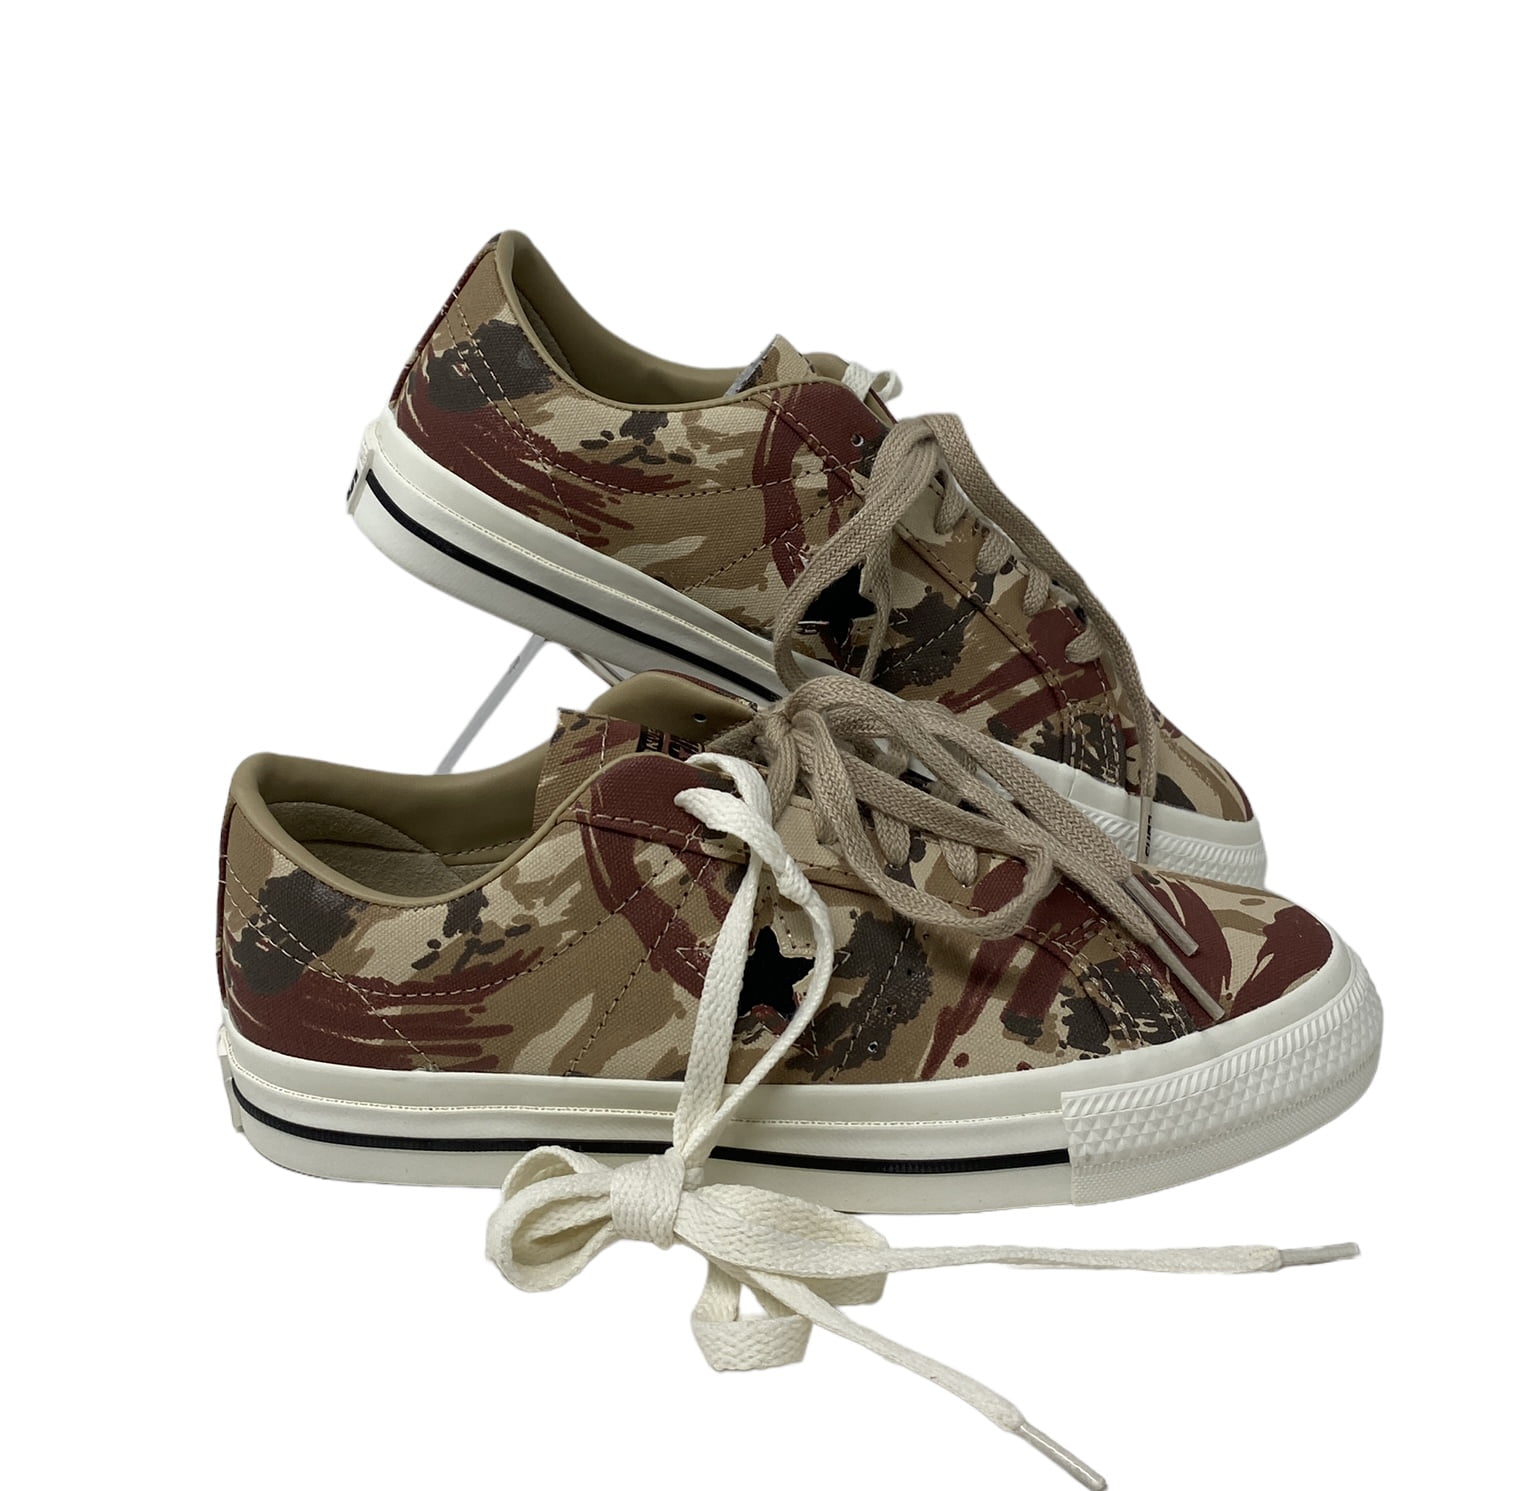 Converse One Star Camo Mid Sneakers For Men - Buy HERBAL/COLLARD/BLACK  Color Converse One Star Camo Mid Sneakers For Men Online at Best Price -  Shop Online for Footwears in India |